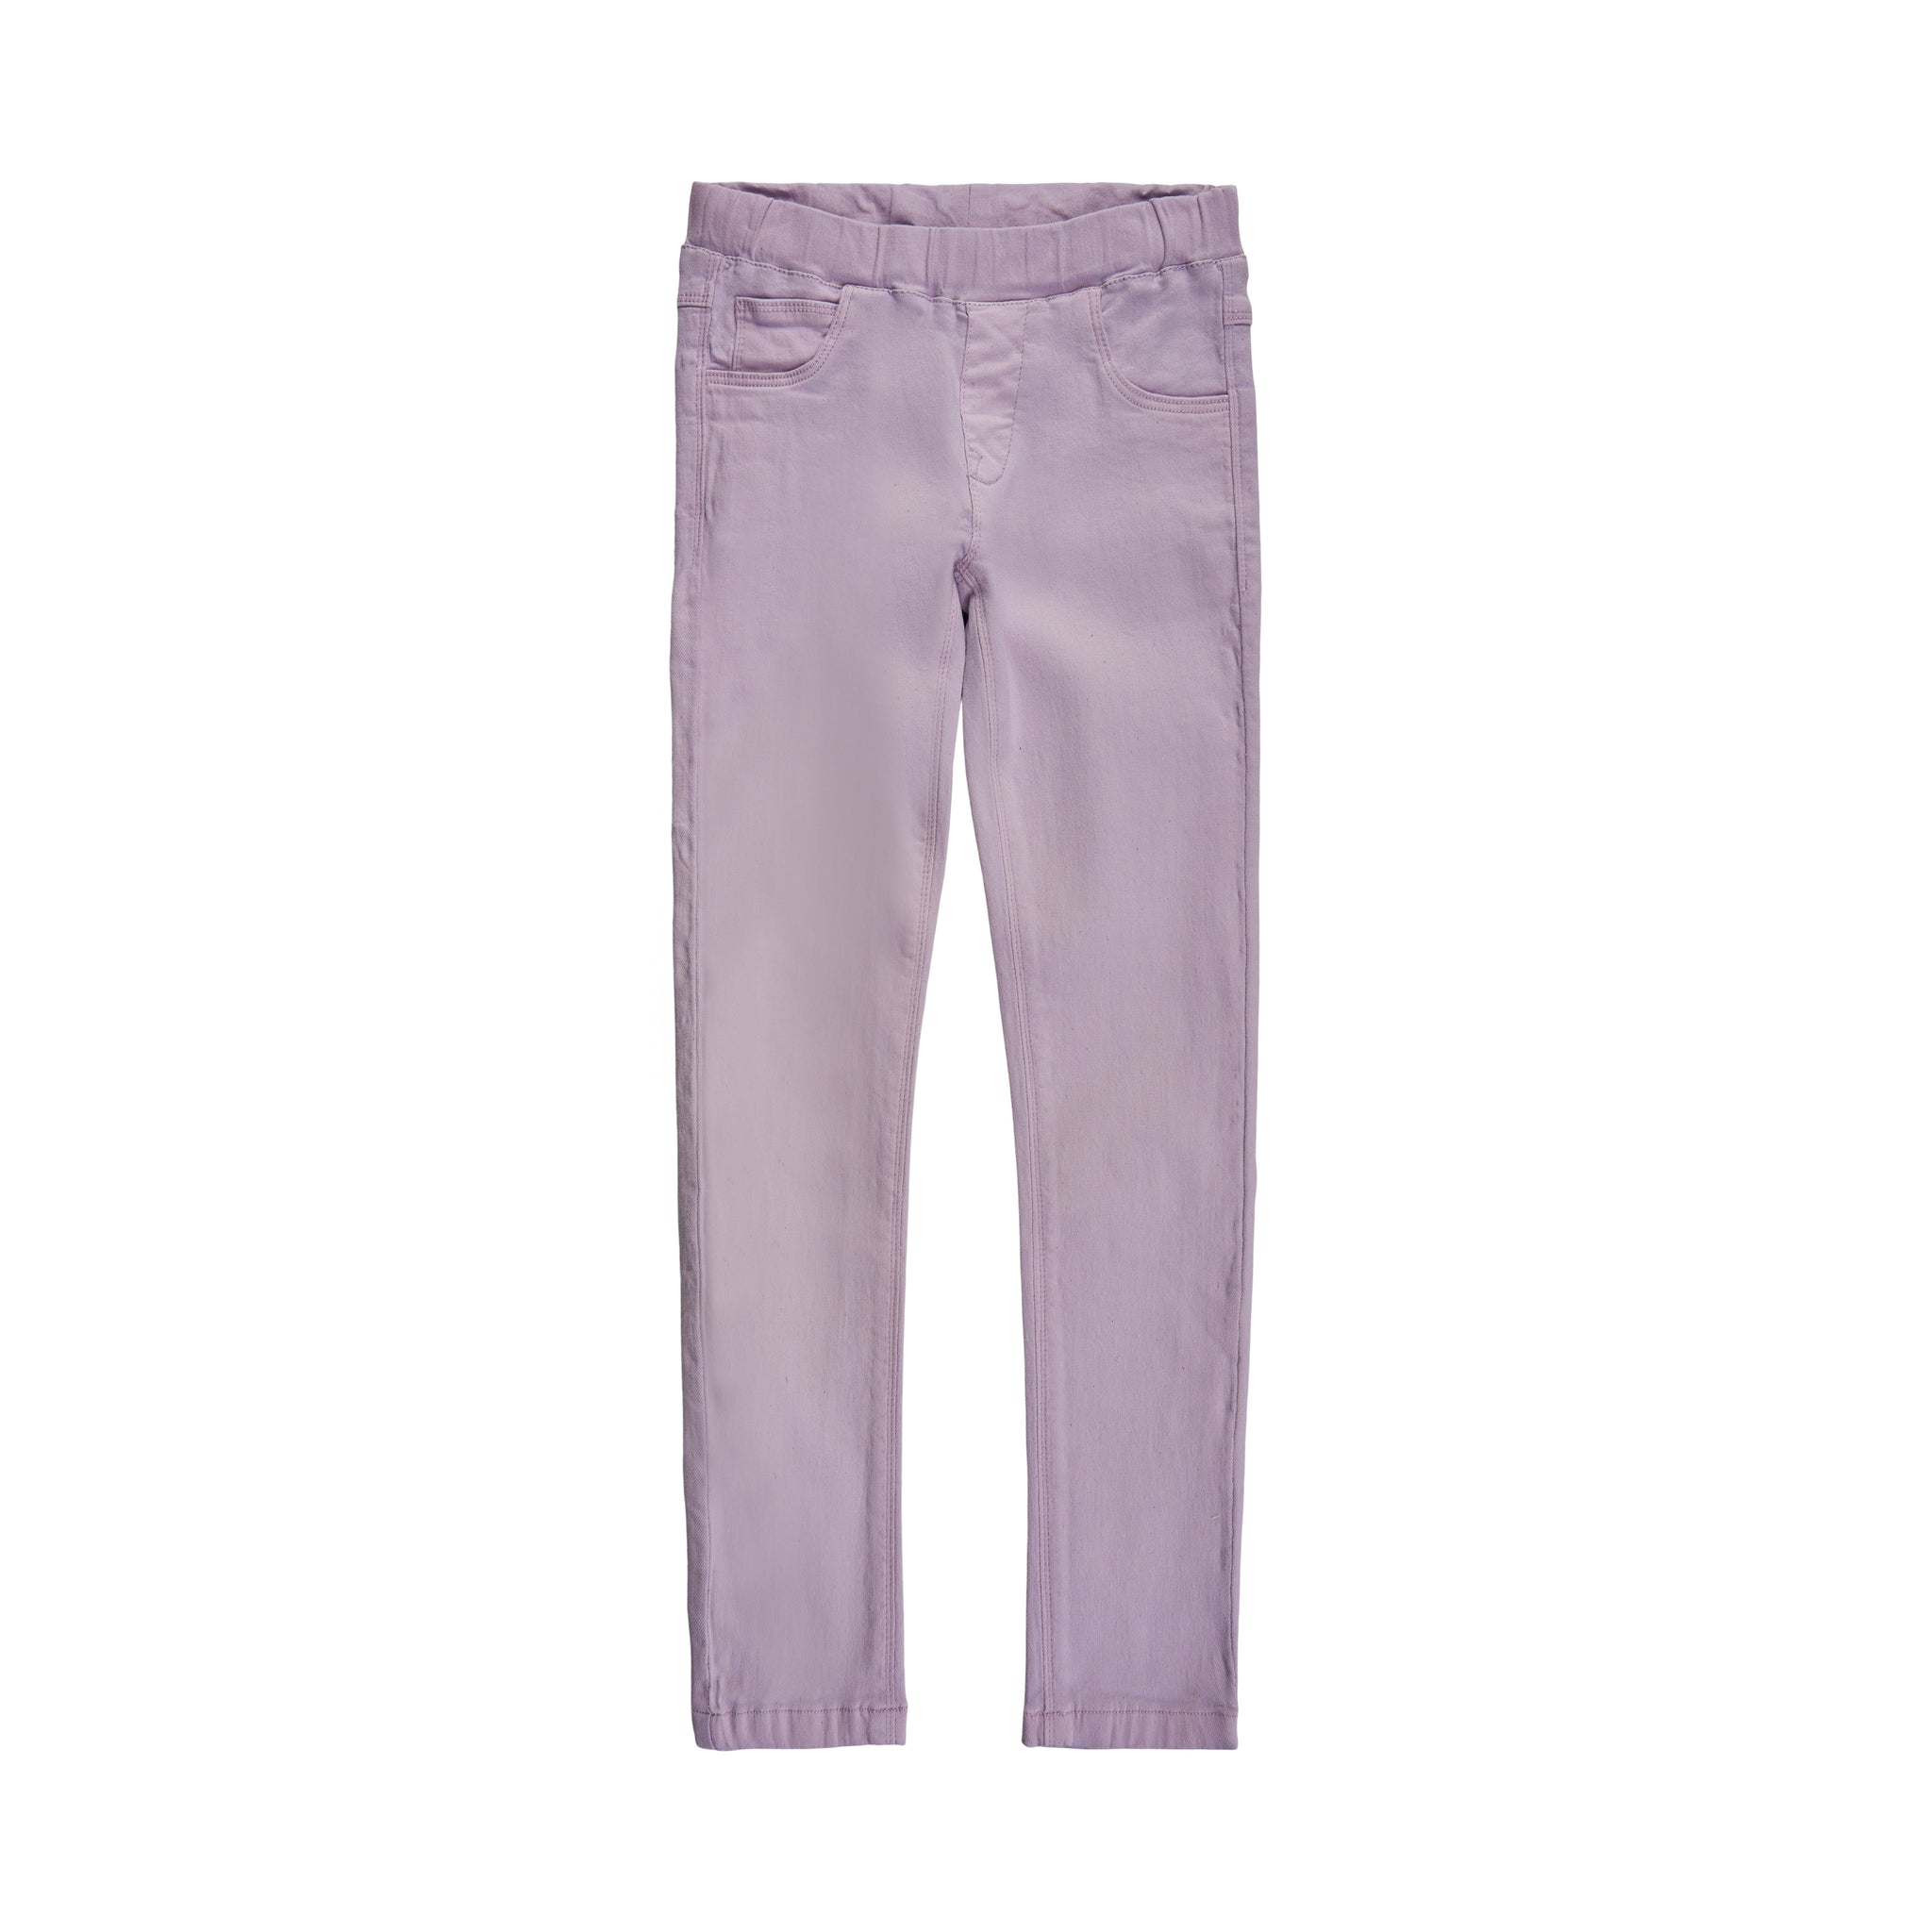 THE NEW - Vigga Colored Jeggings (TN4176) - Orchid Petal